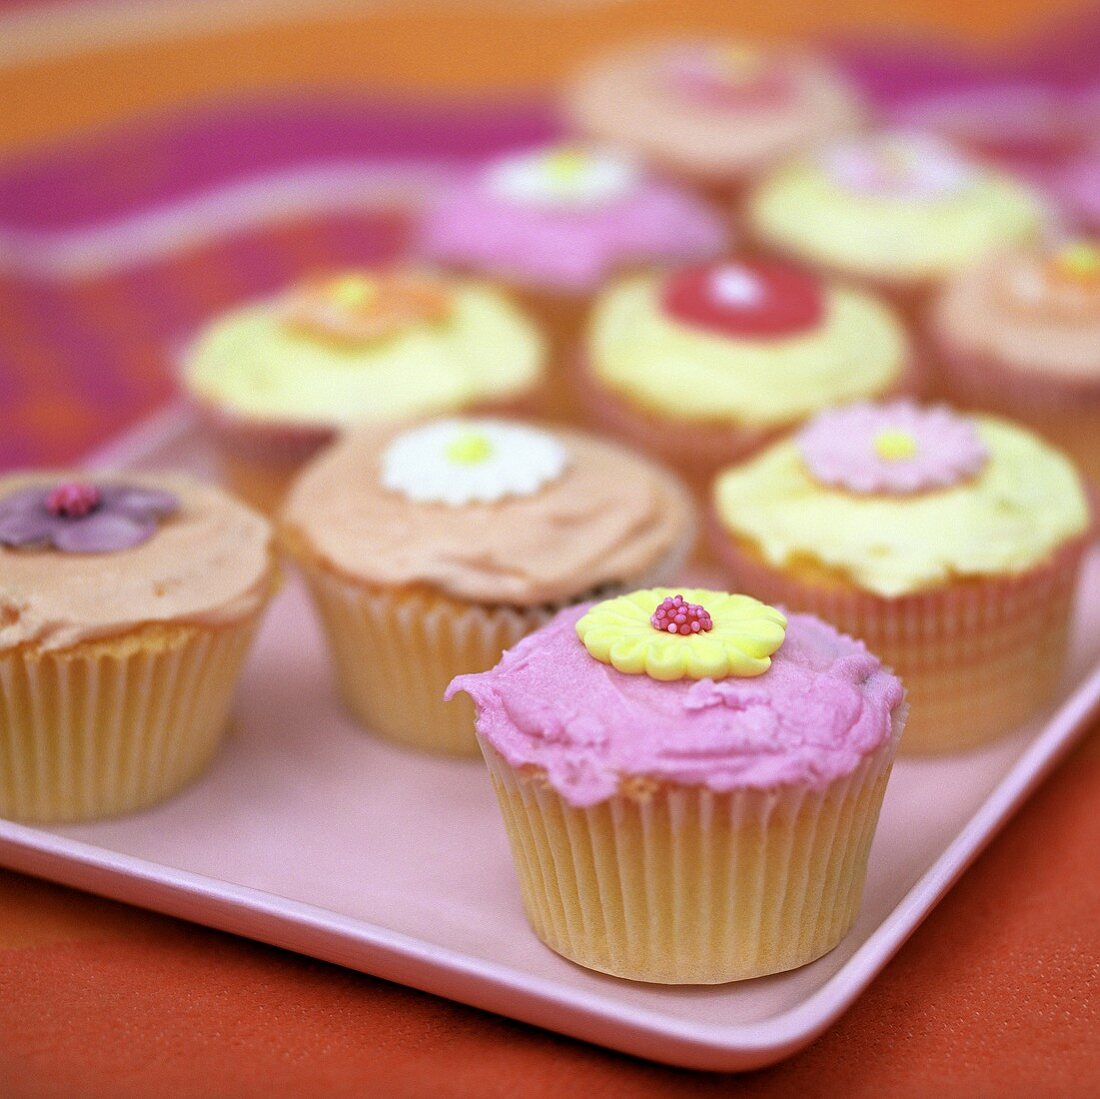 Several colourful cup-cakes decorated with sugar flowers